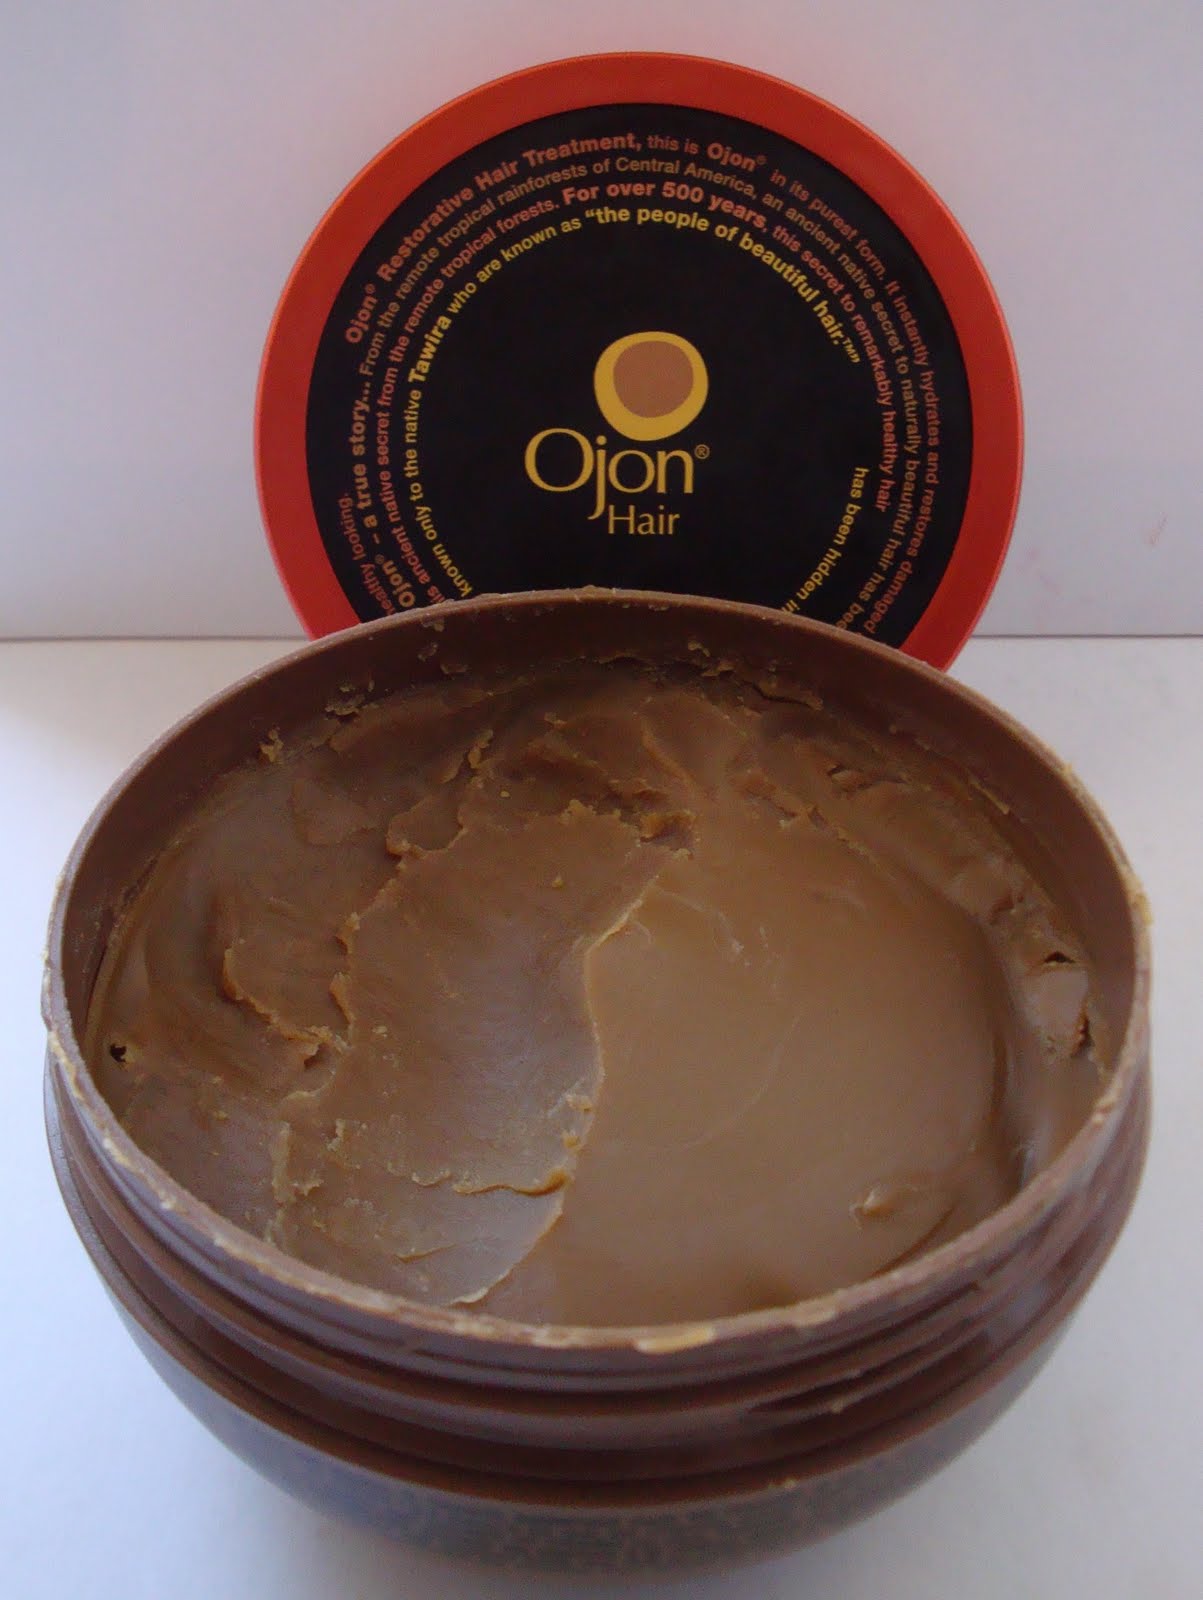 Explanations To Equip Your Studio By Using A Ojon Restorative Hair